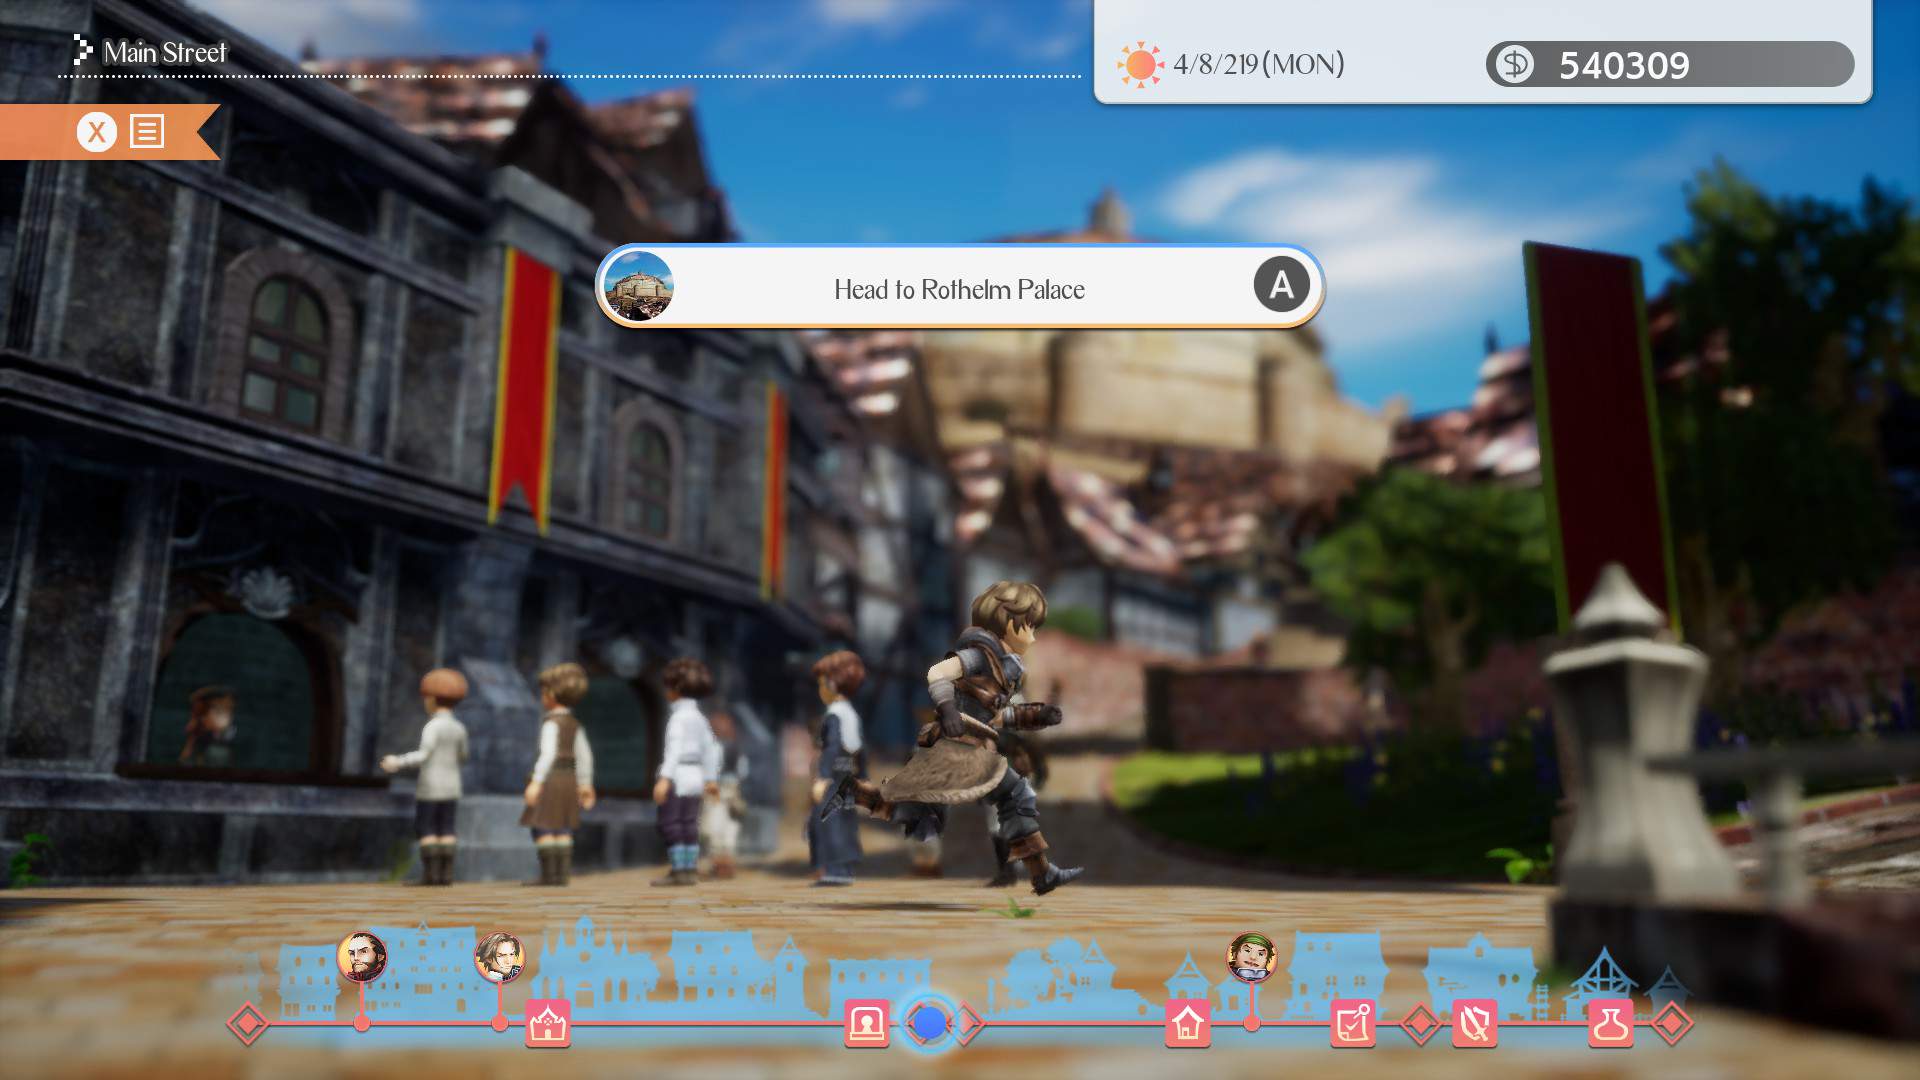 Gameplay screenshot of the protagonist character running through town